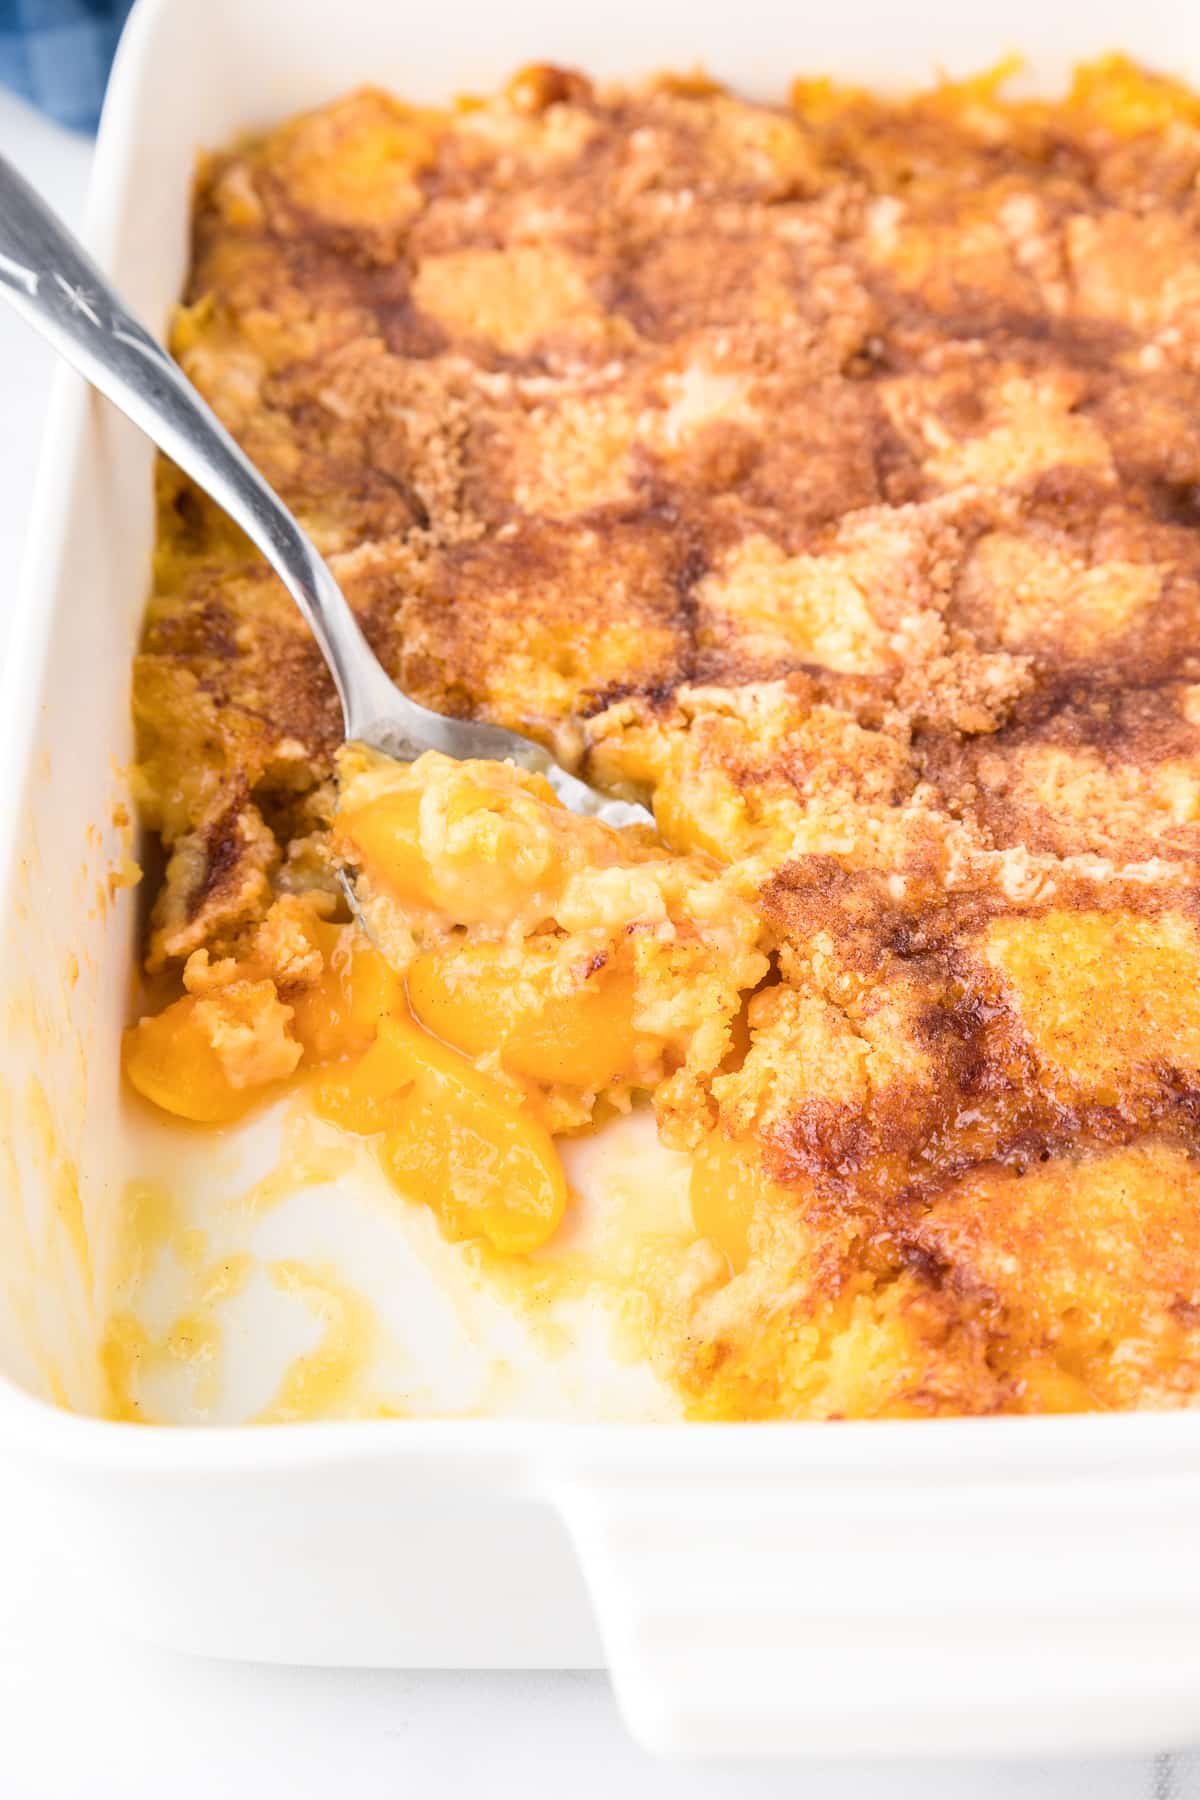 Peach dump cake close up in a pan being scooped by a spoon with a scoop missing.